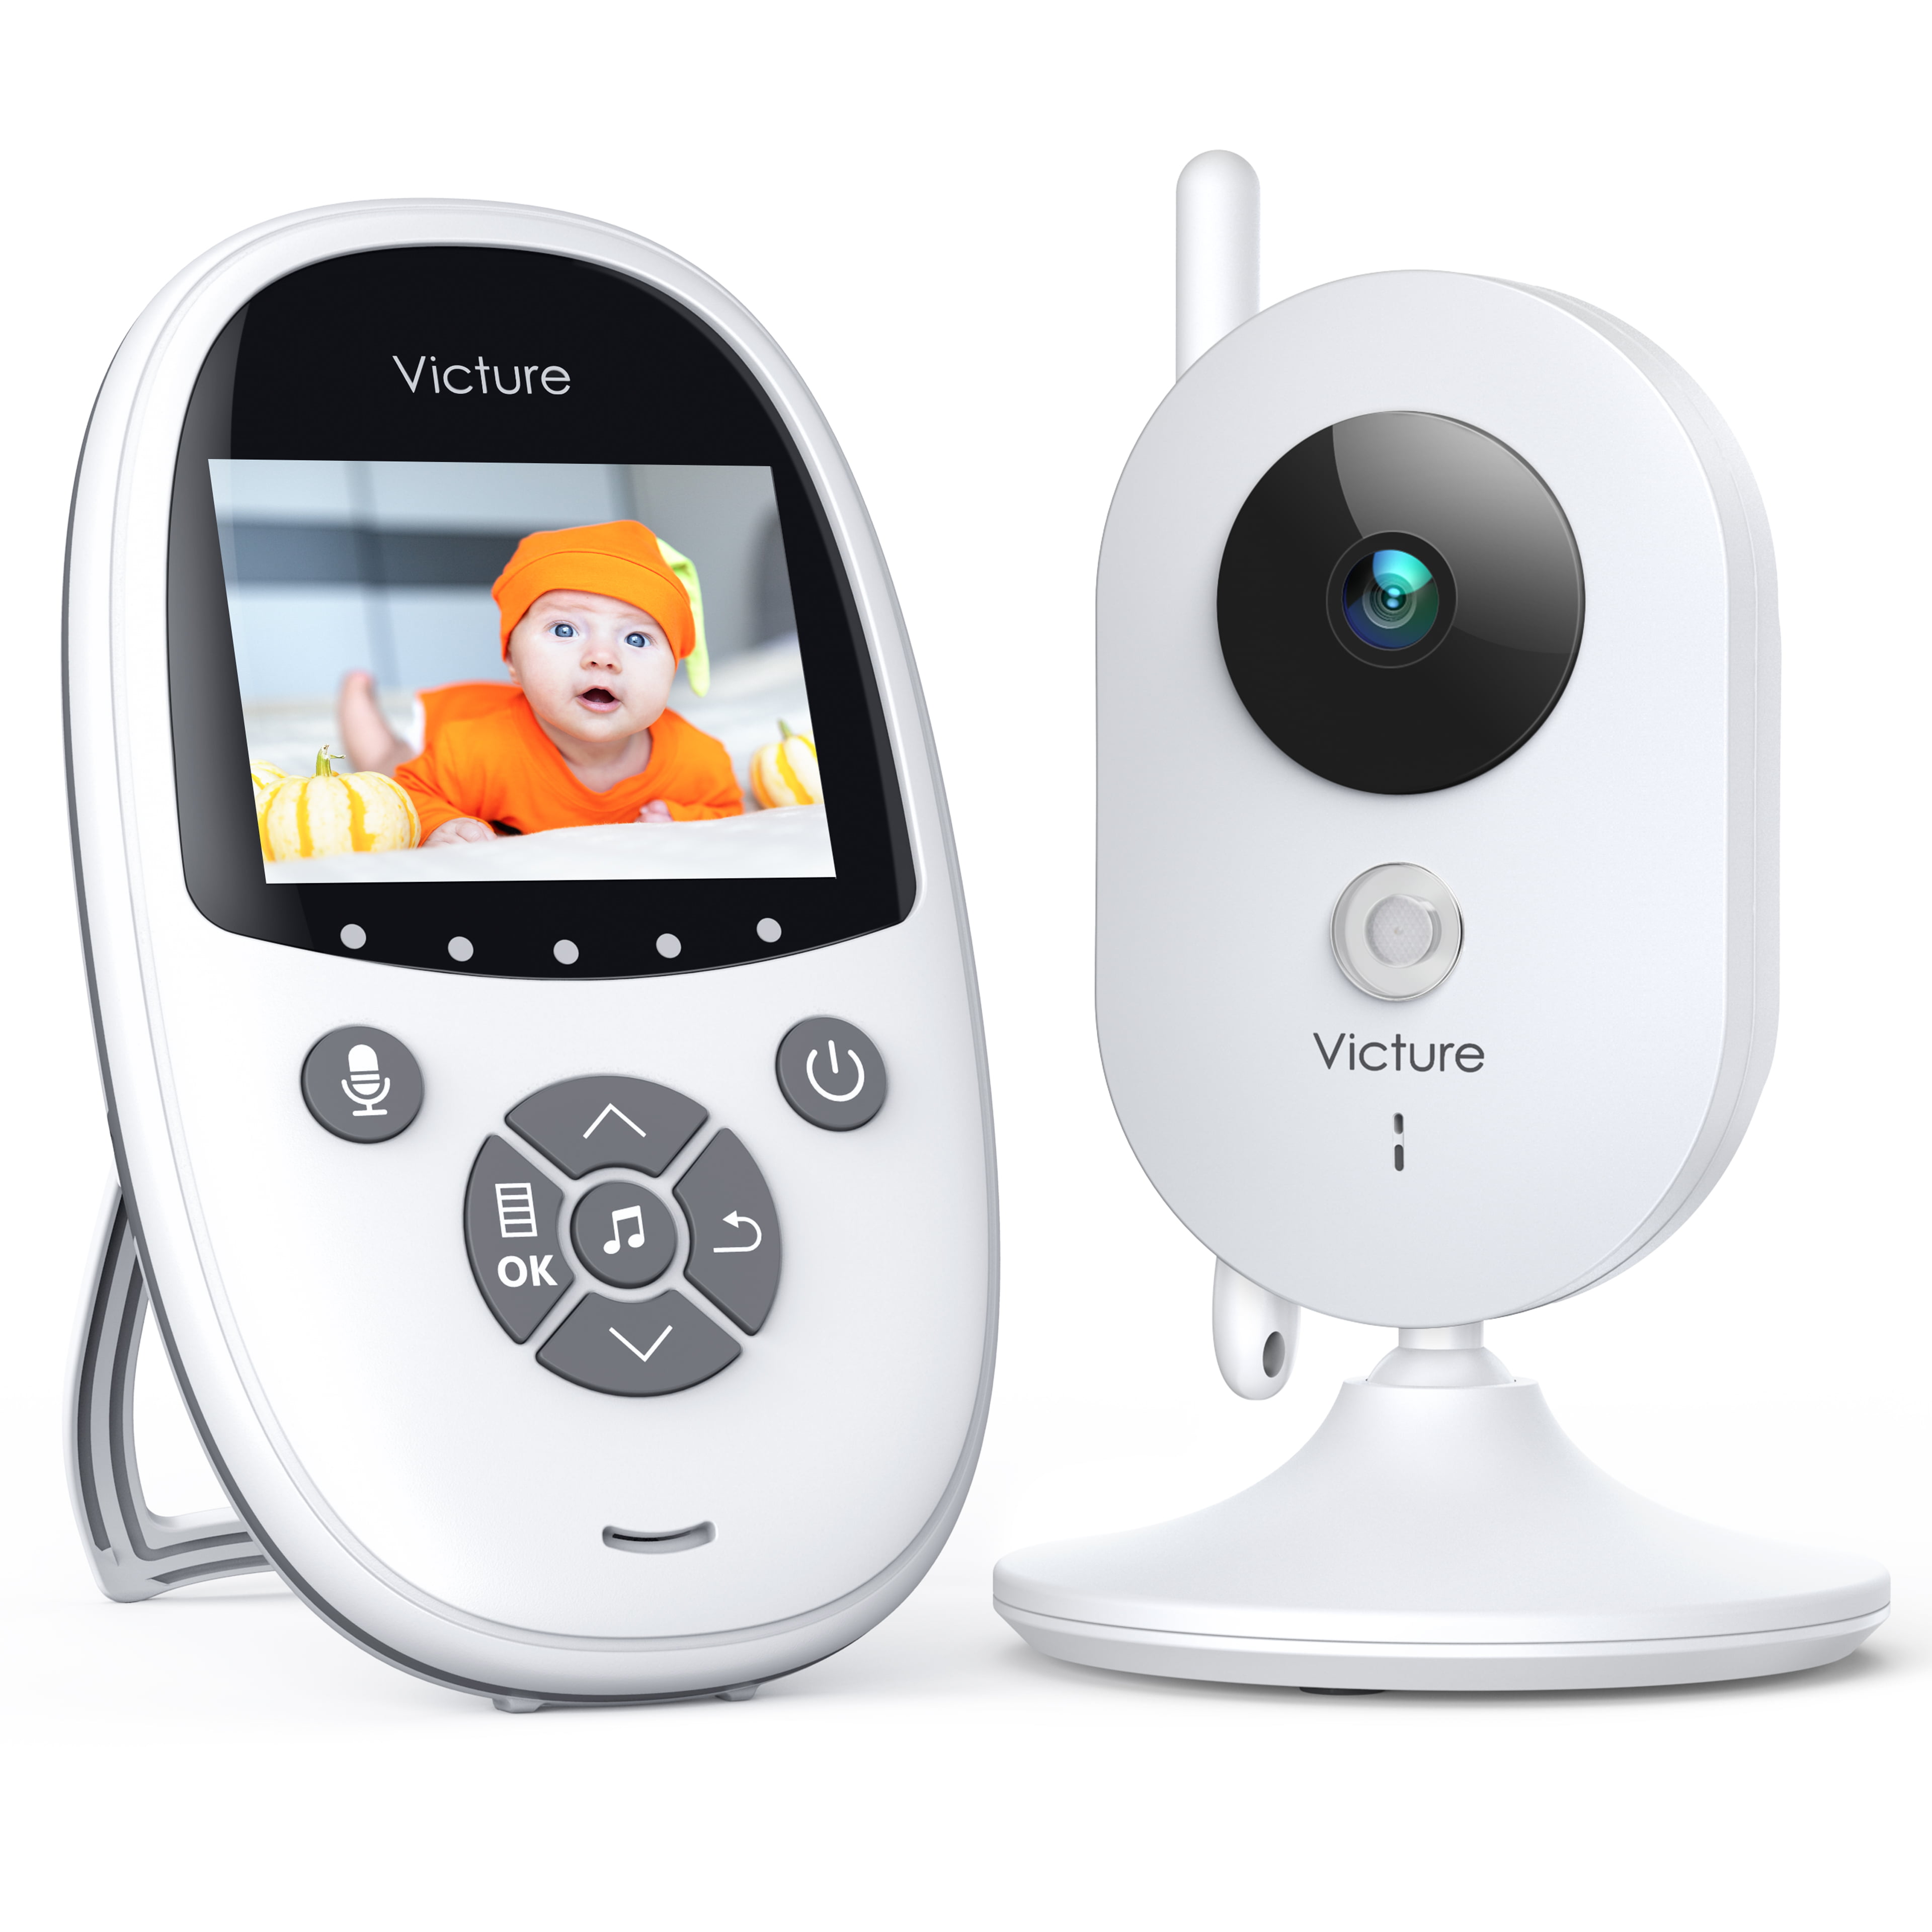 Exceptional Picture Quality & Audio Perfect Nursery Accessory Equipped with Night Vision Mode Includes Temperature Display High-Performing Baby Monitor with Camera Pan-Tilt-Zoom Baby Camera